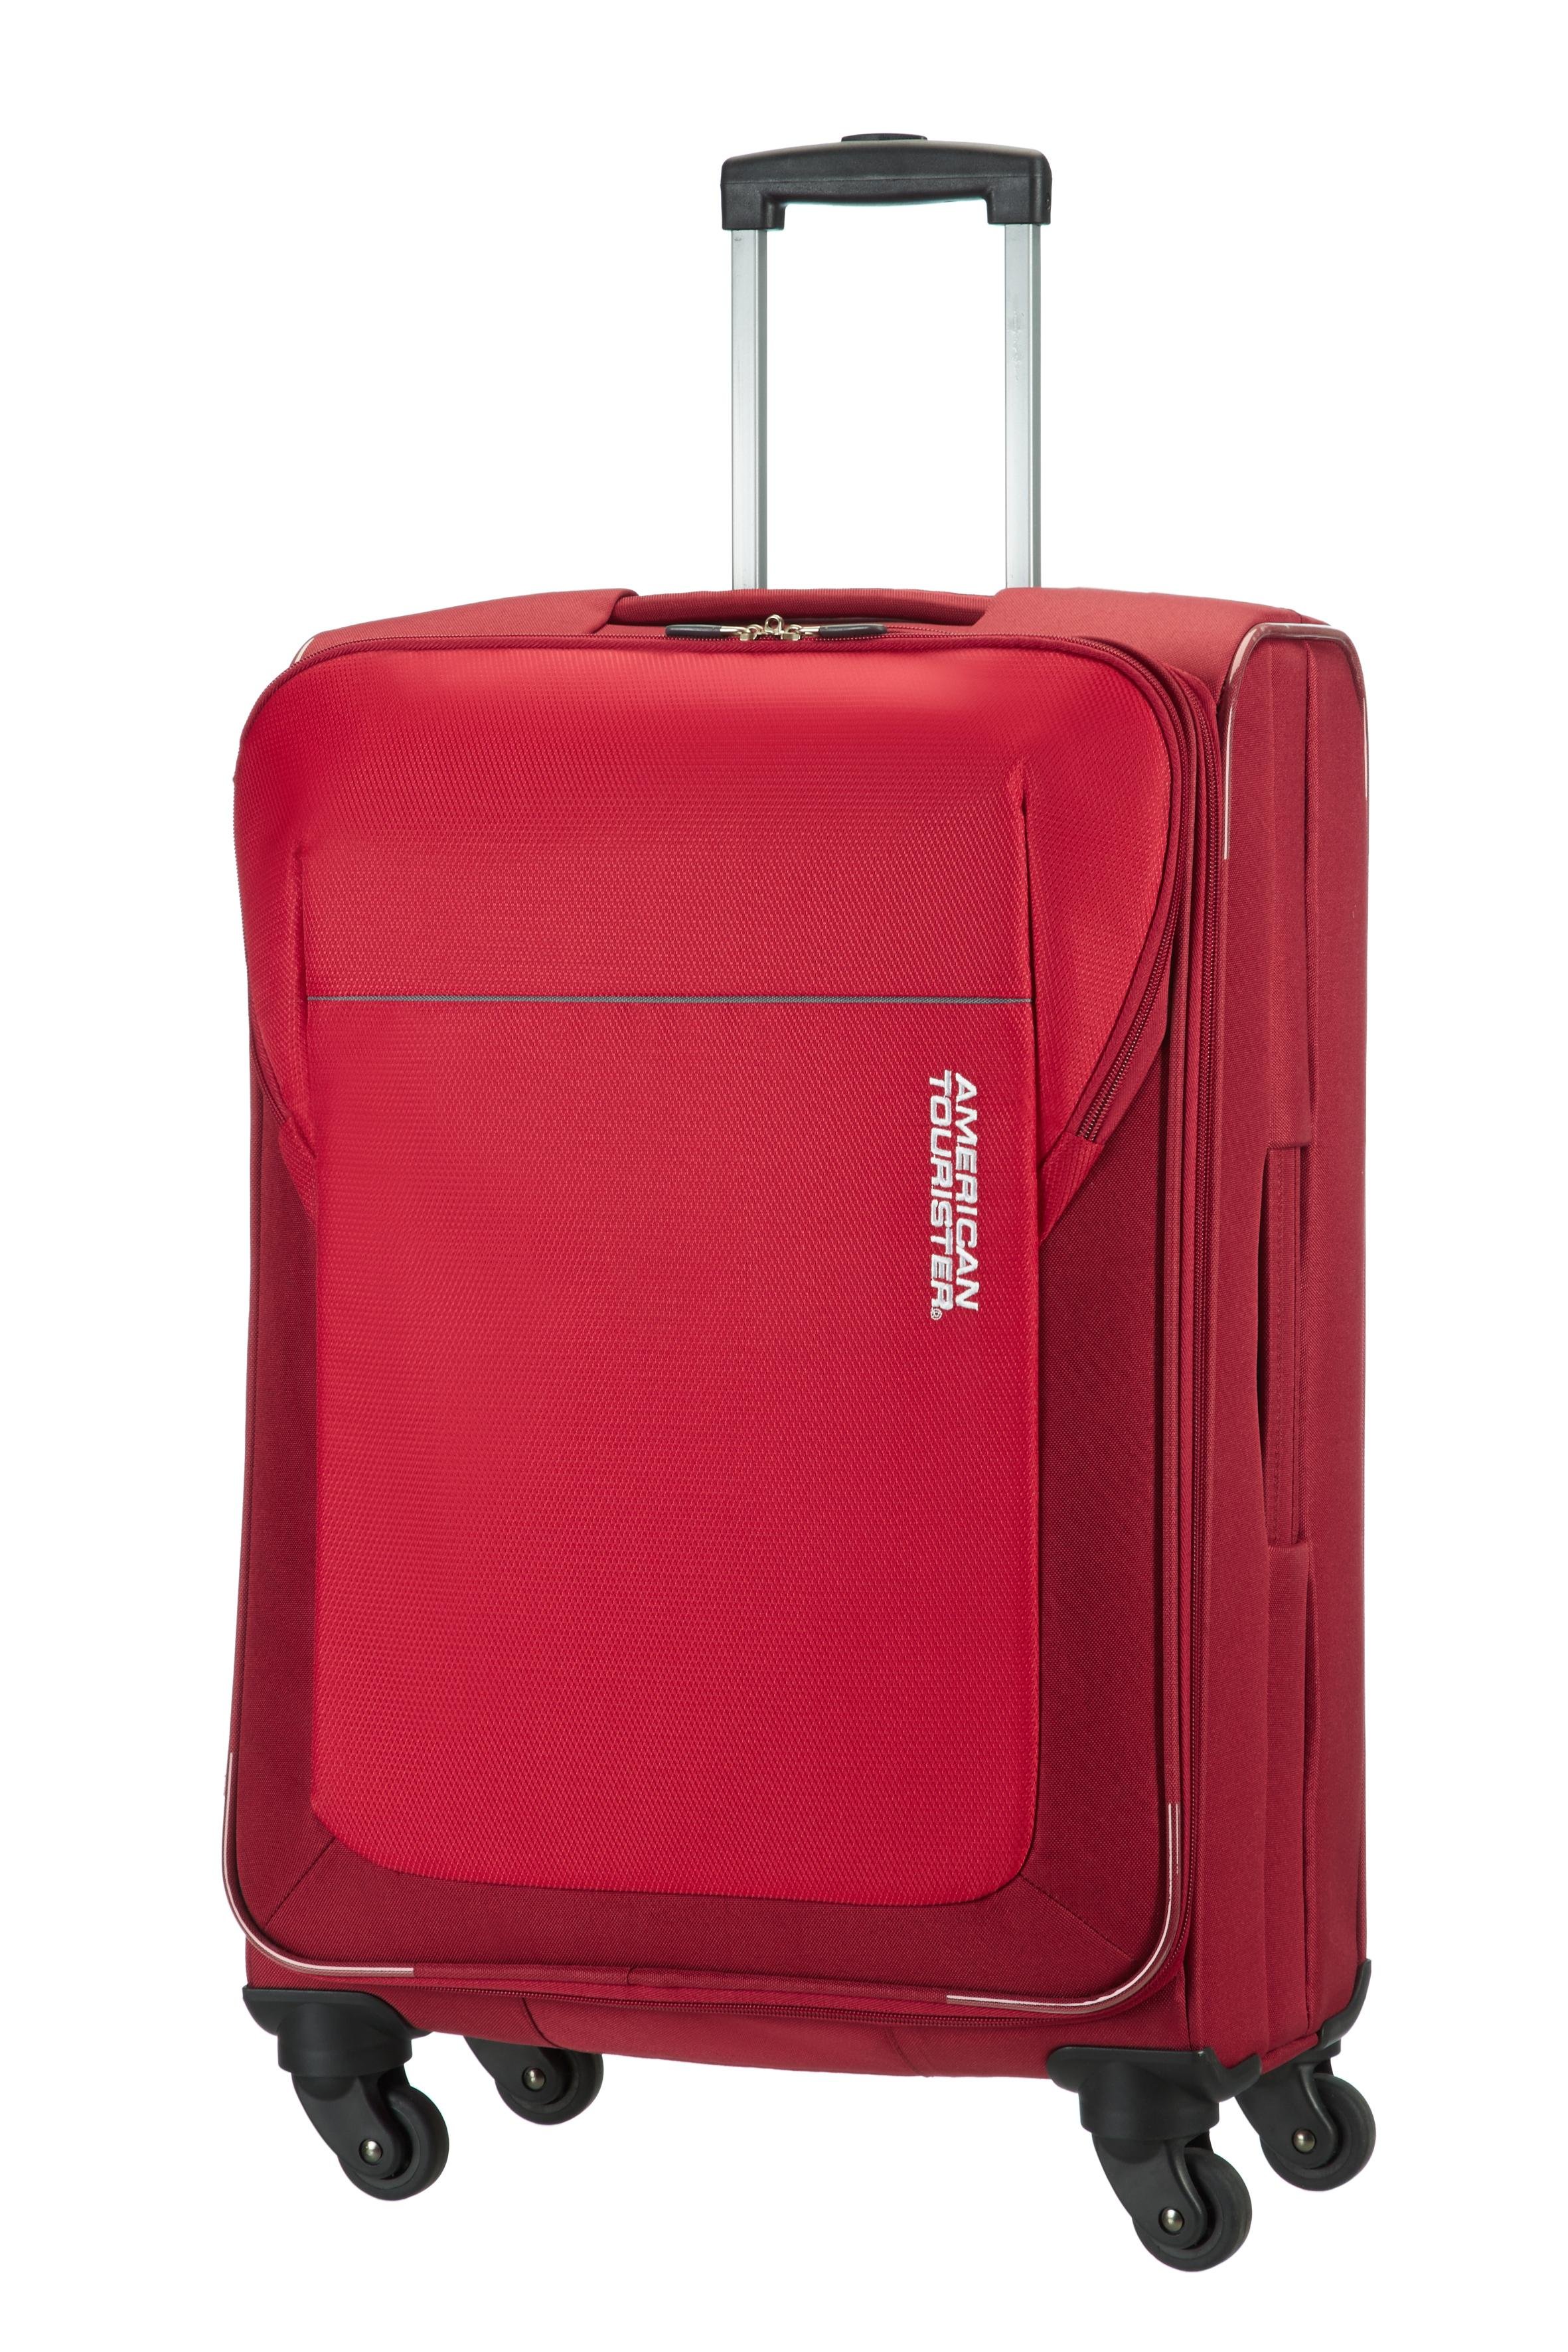 American Tourister suitcase 4-wheel San Francisco 66cm red ...